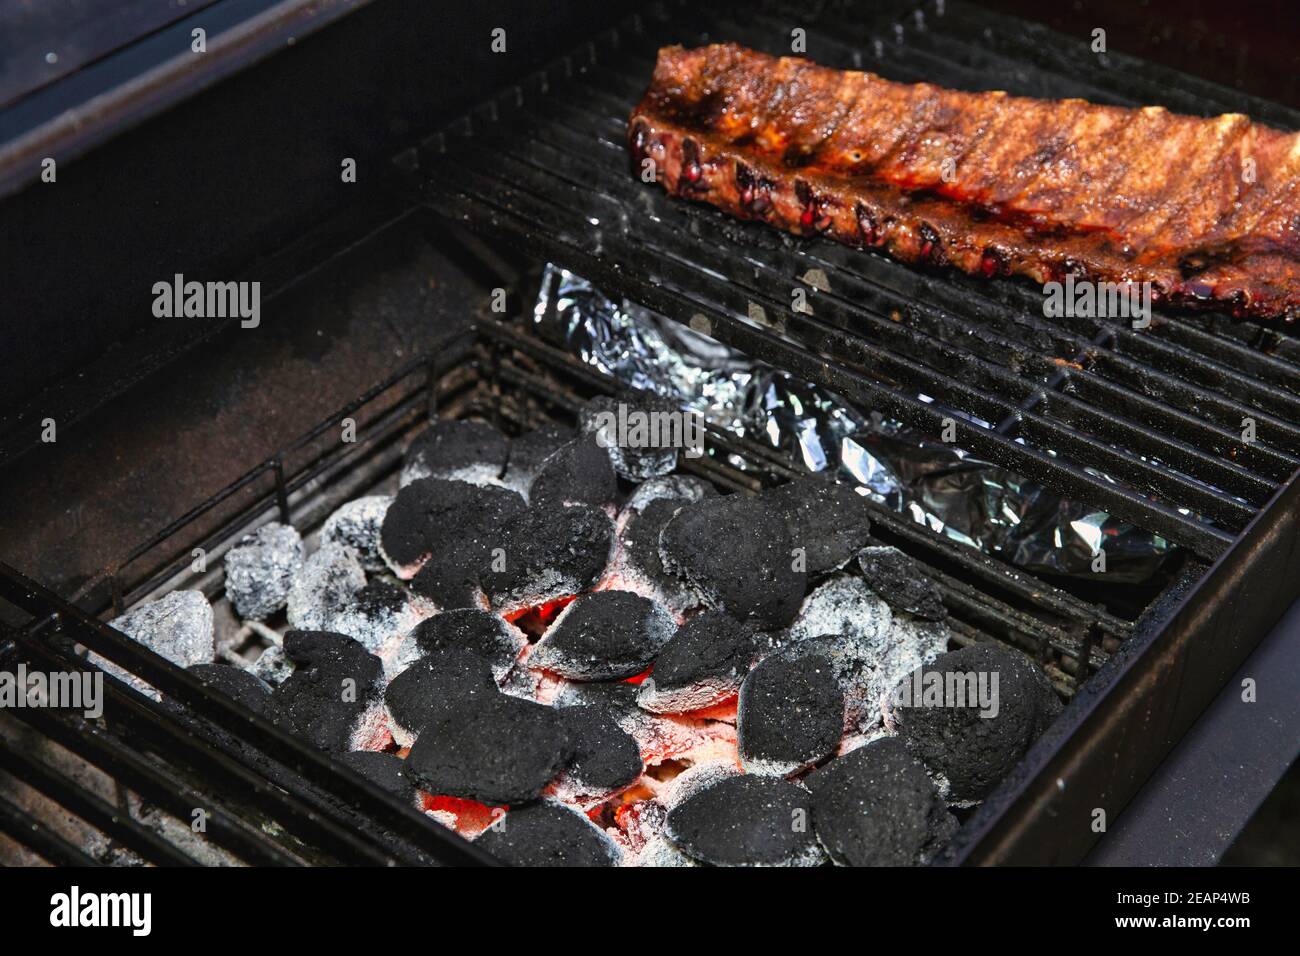 Close-up Of BBQ Roast and Smoked Pork Spareribs glazed with sauze On The Hot Charcoal Grill With Flames, Barbecue and hobby concept Stock Photo